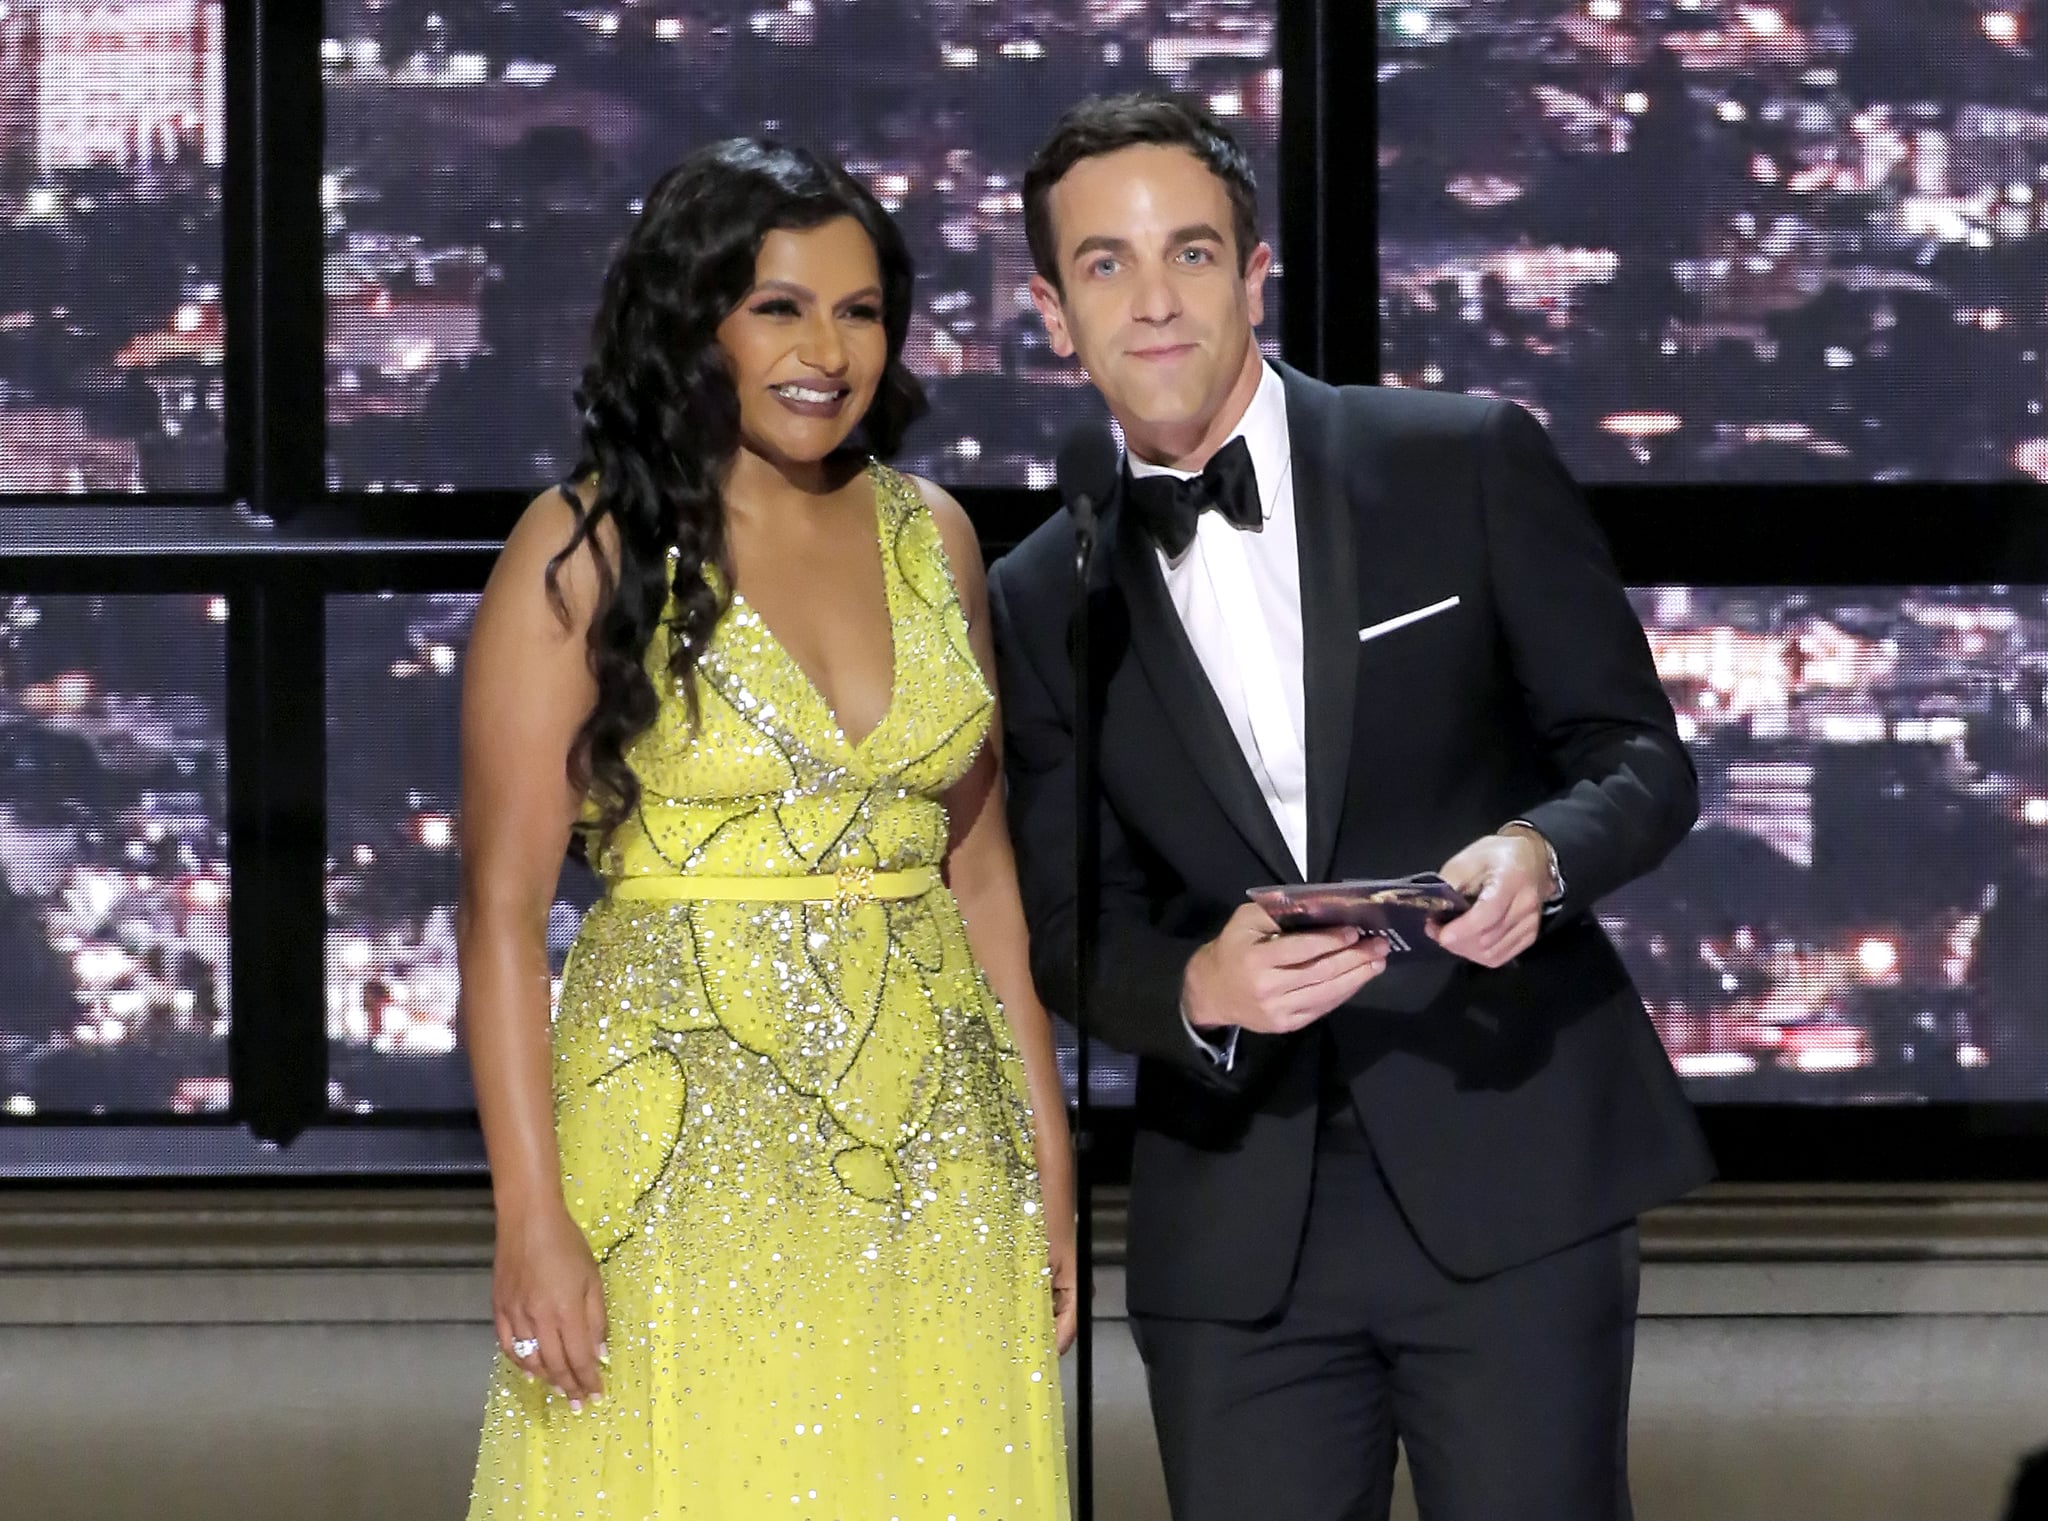 LOS ANGELES, CALIFORNIA - SEPTEMBER 12: 74th ANNUAL PRIMETIME EMMY AWARDS -- Pictured: (l-r) Mindy Kaling and B.J. Novak speak on stage during the 74th Annual Primetime Emmy Awards held at the Microsoft Theater on September 12, 2022. -- (Photo by Chris Haston/NBC via Getty Images)